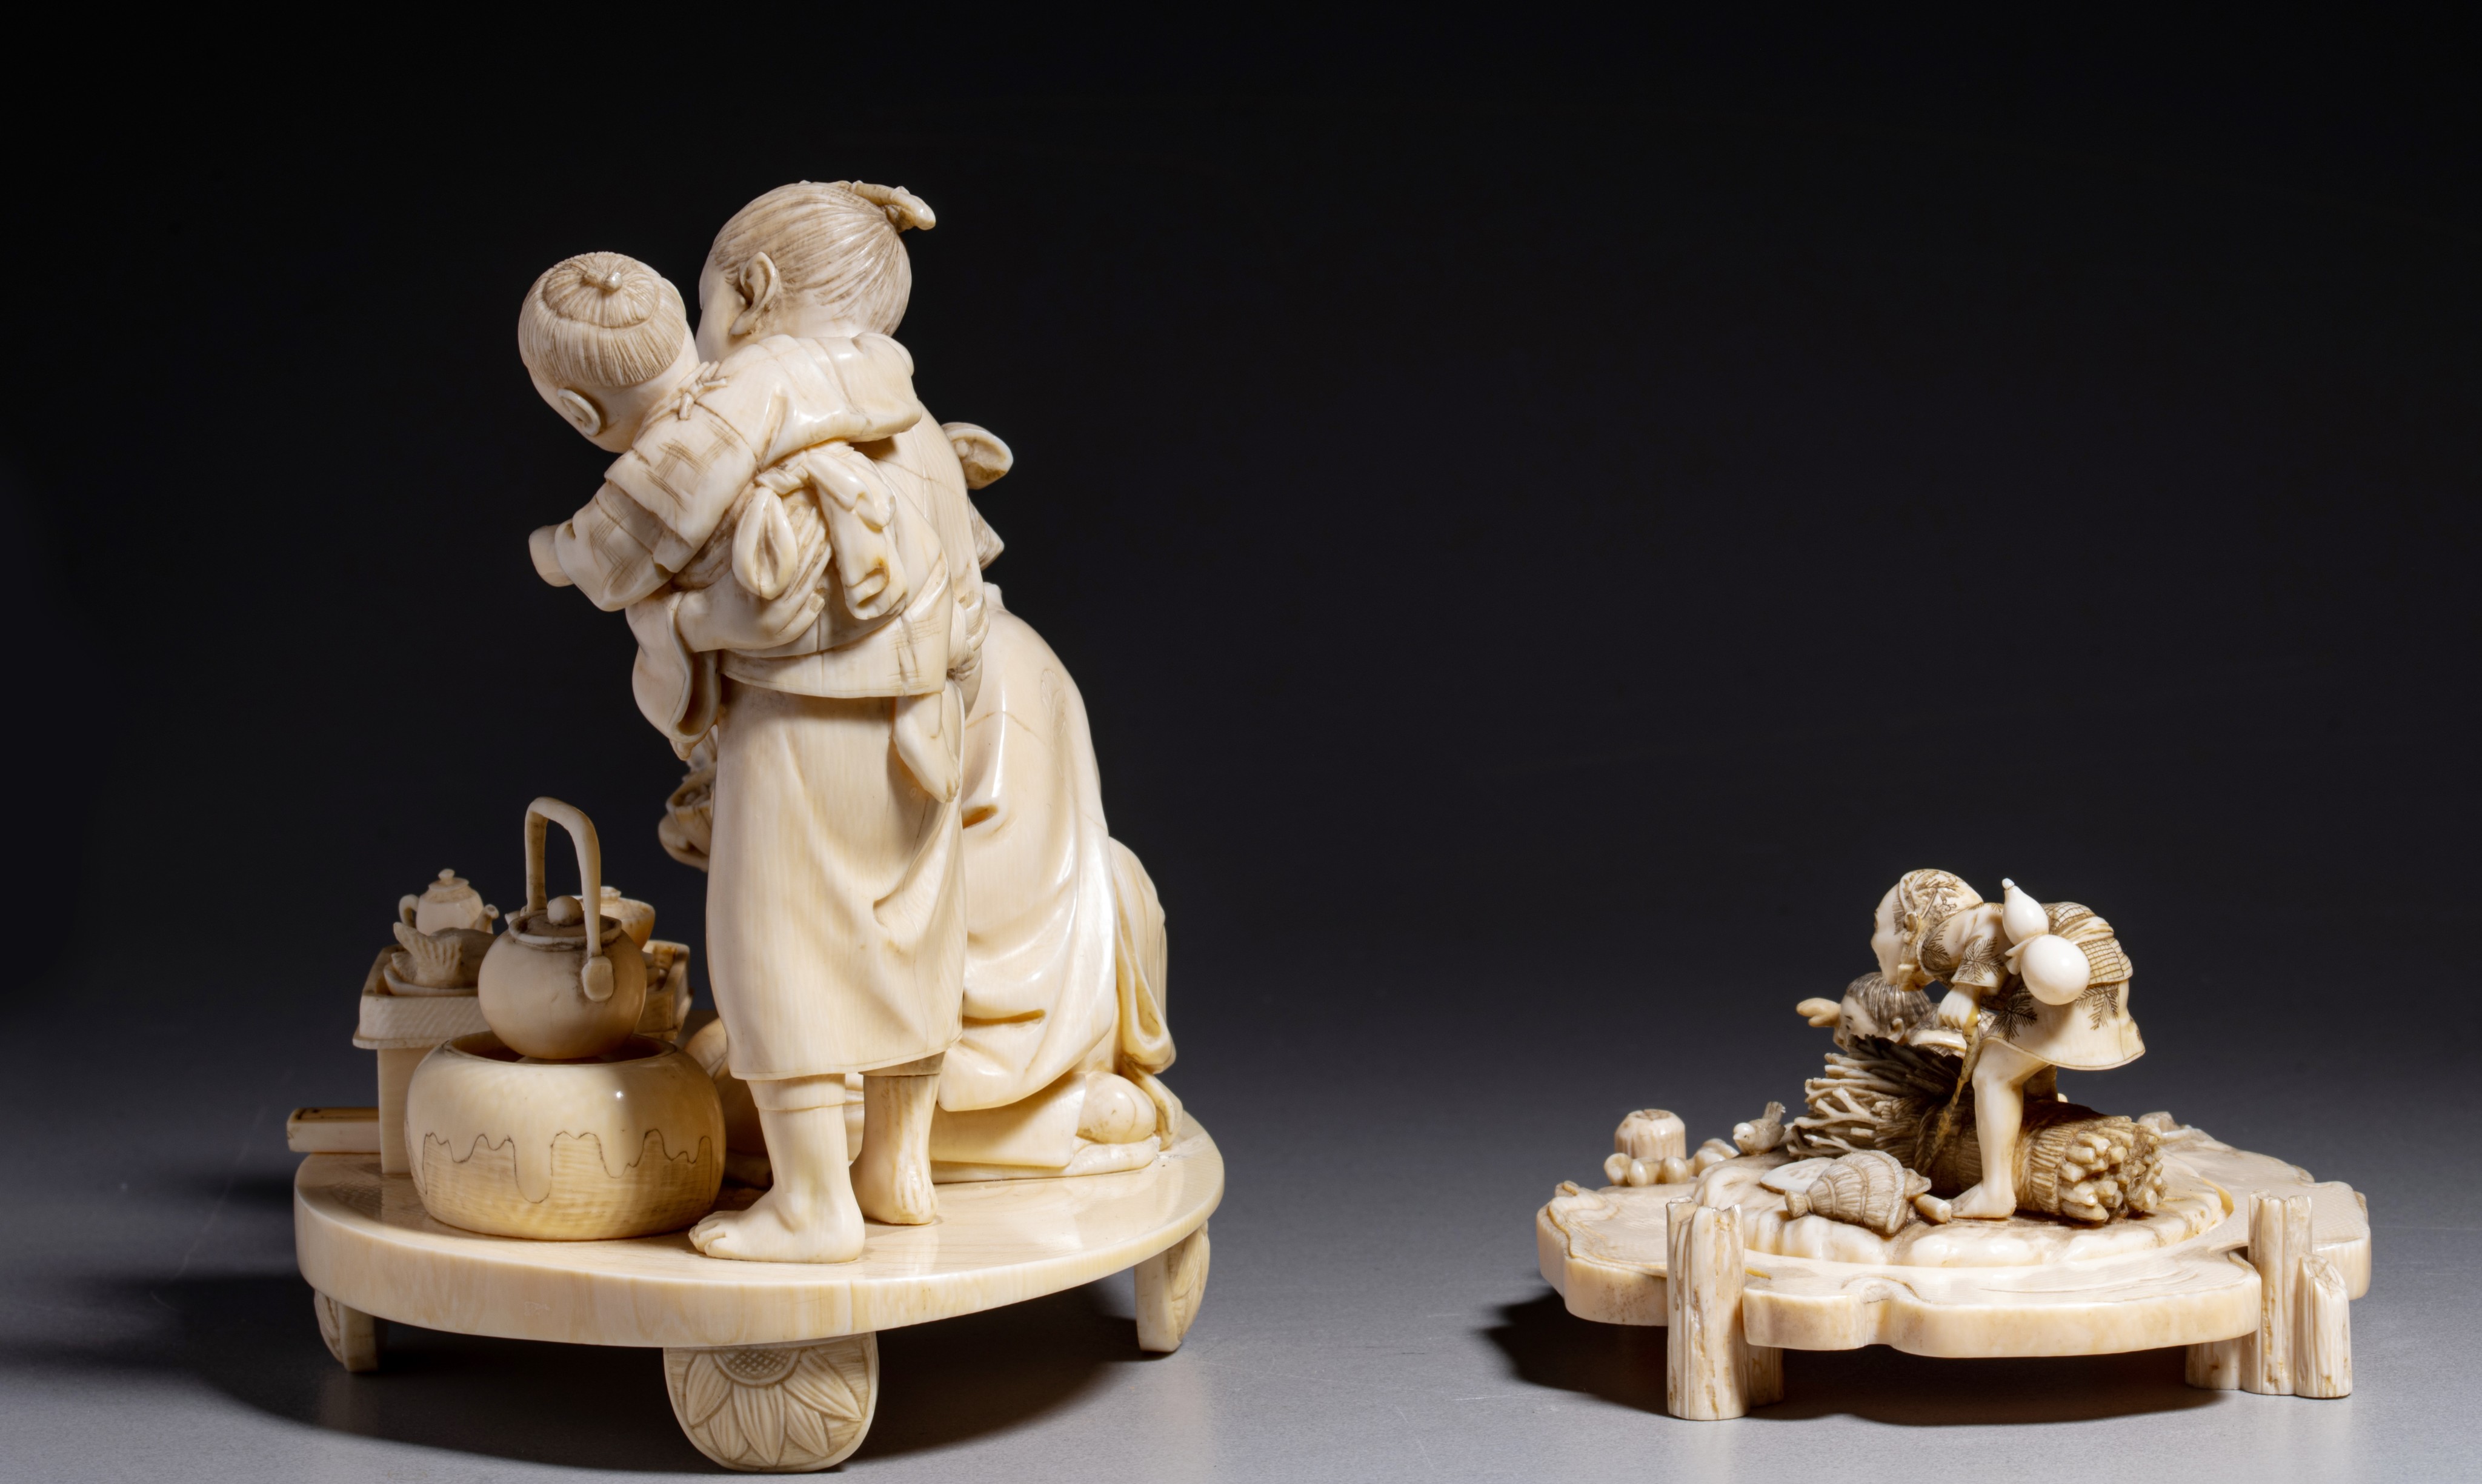 Two Japanese ivory animated scenes, H 12,4 cm - H 5,2 cm, 451g - 118g (+) - Image 2 of 7